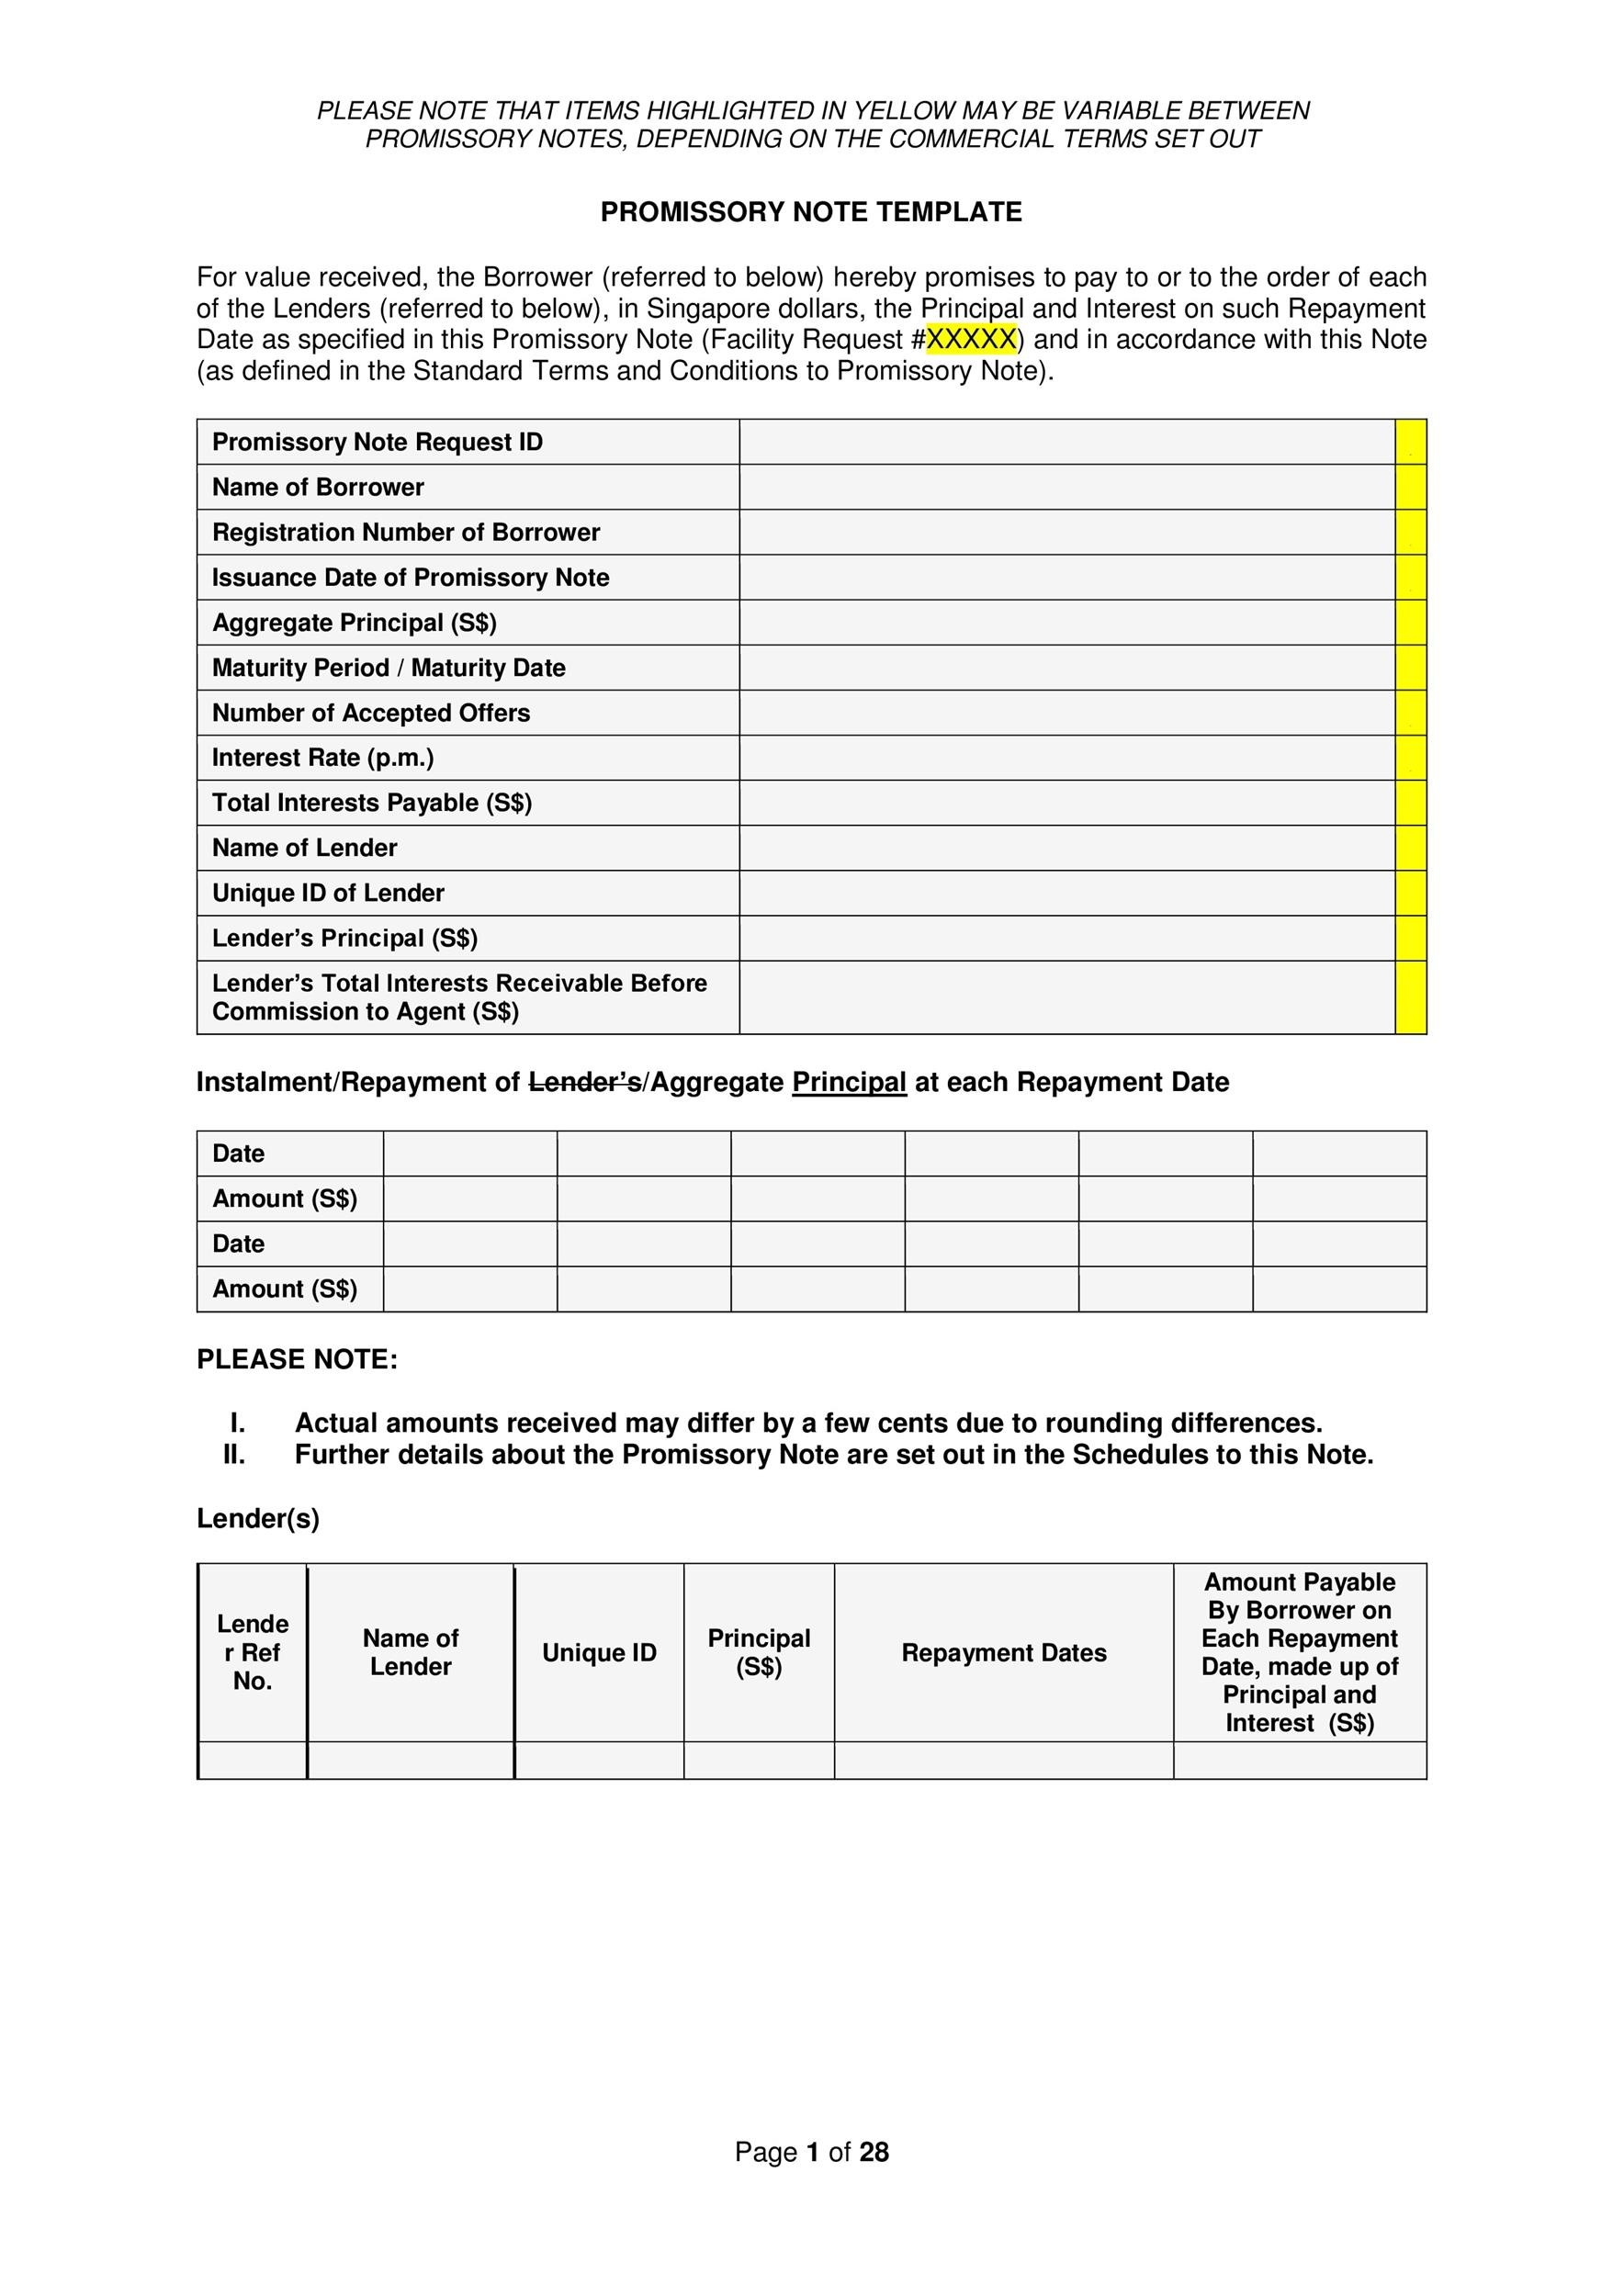 Free promissory note template 16